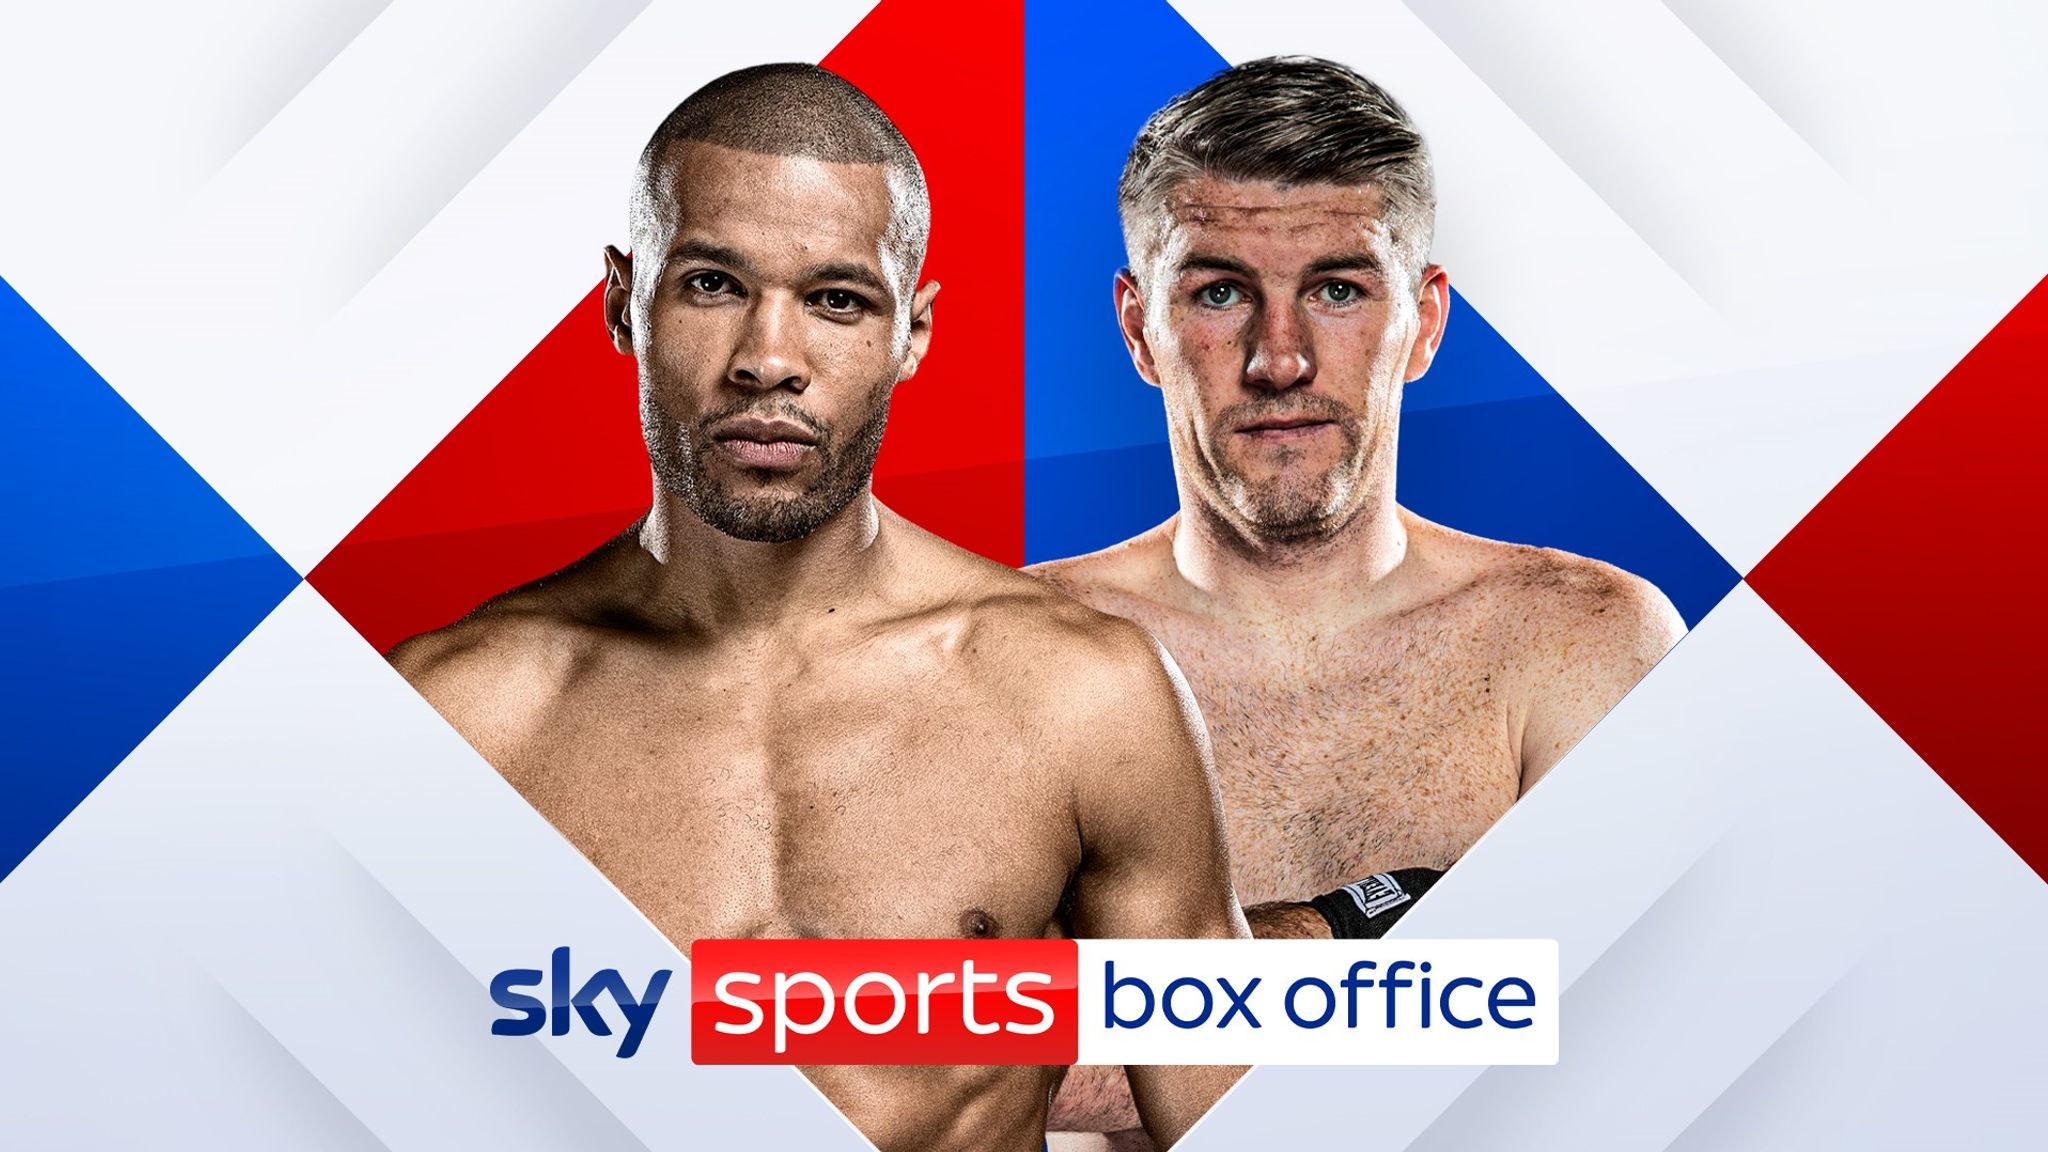 Chris Eubank Jr vs Liam Smith: Preview, Where to watch and Betting odds